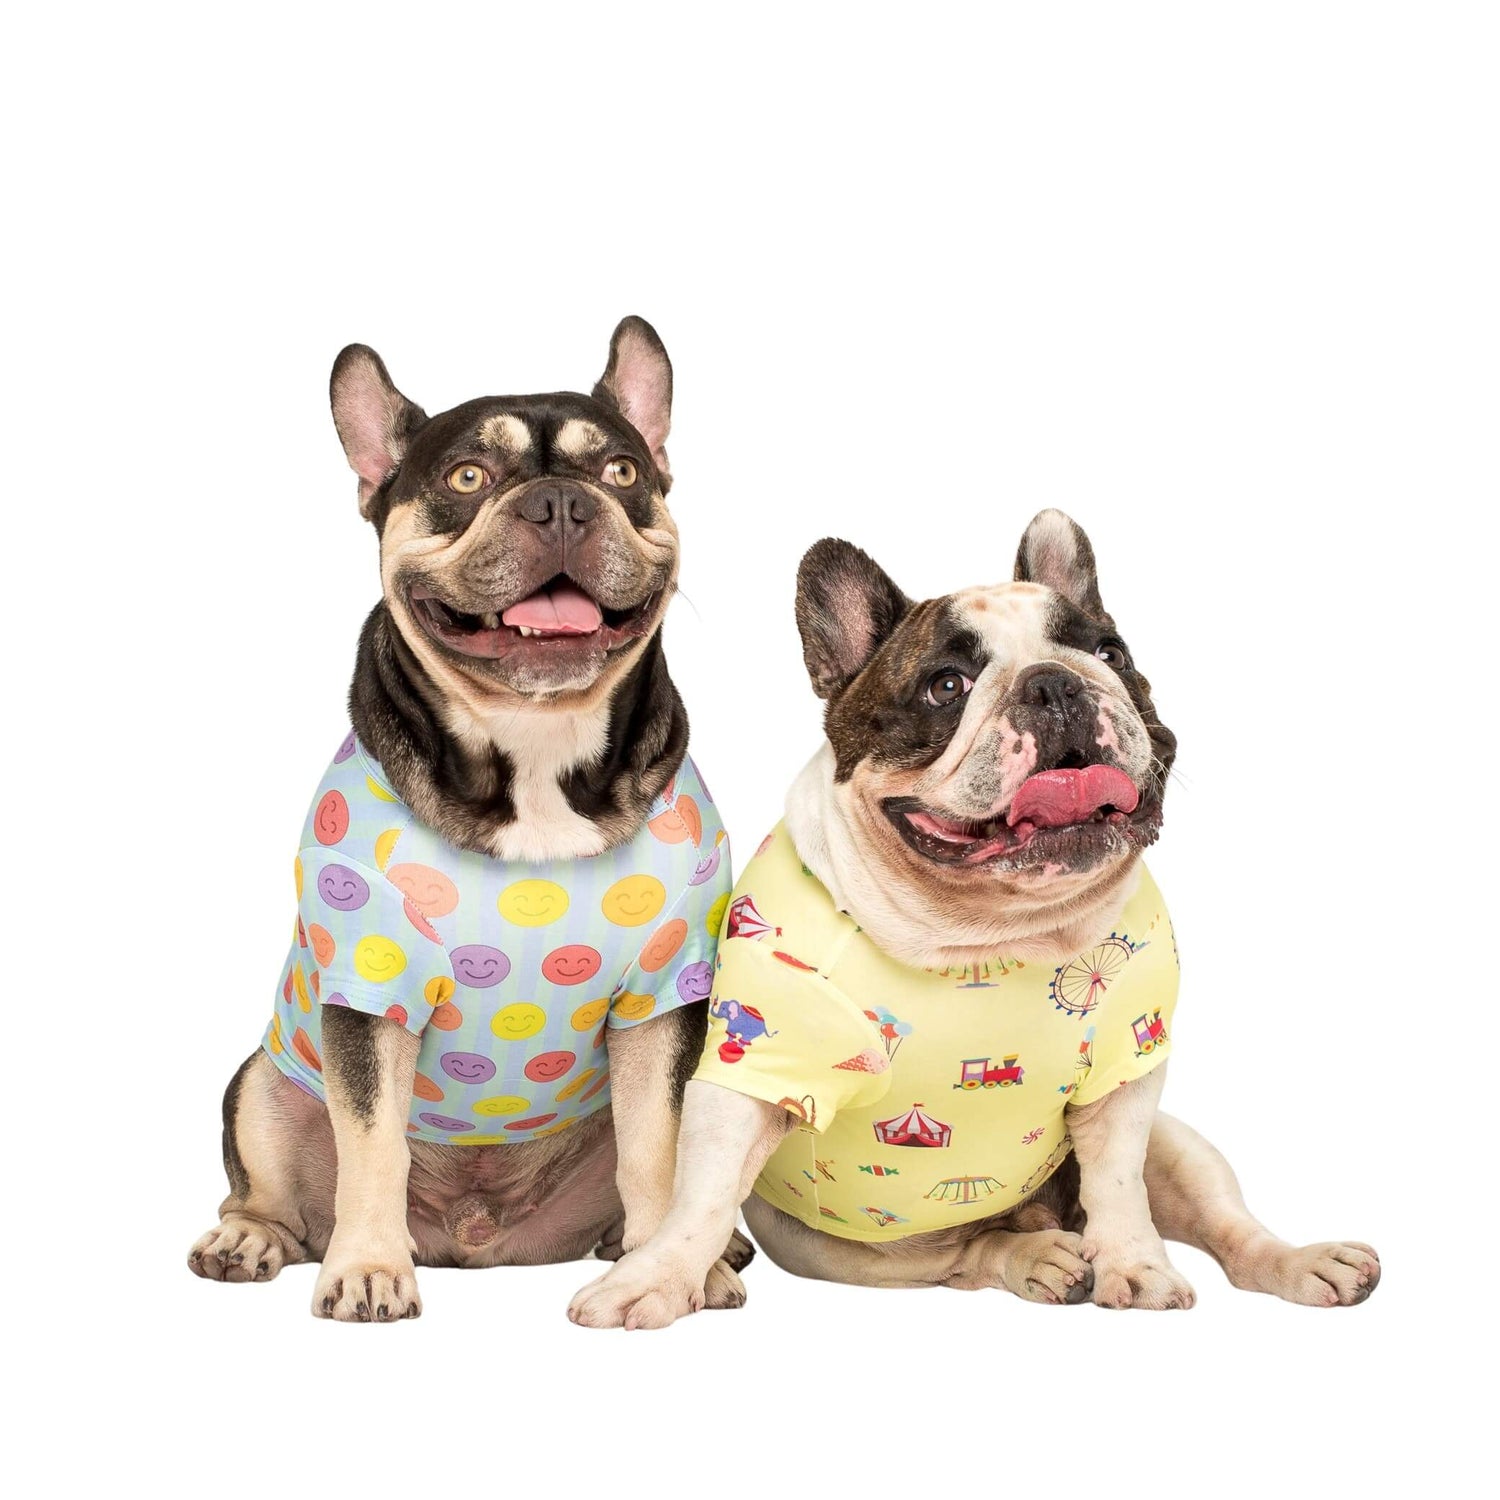 Two French Bulldogs wearing Vibrant Hound dog shirts. The Good Vibes dog shirt is covered in bright smiley faces.